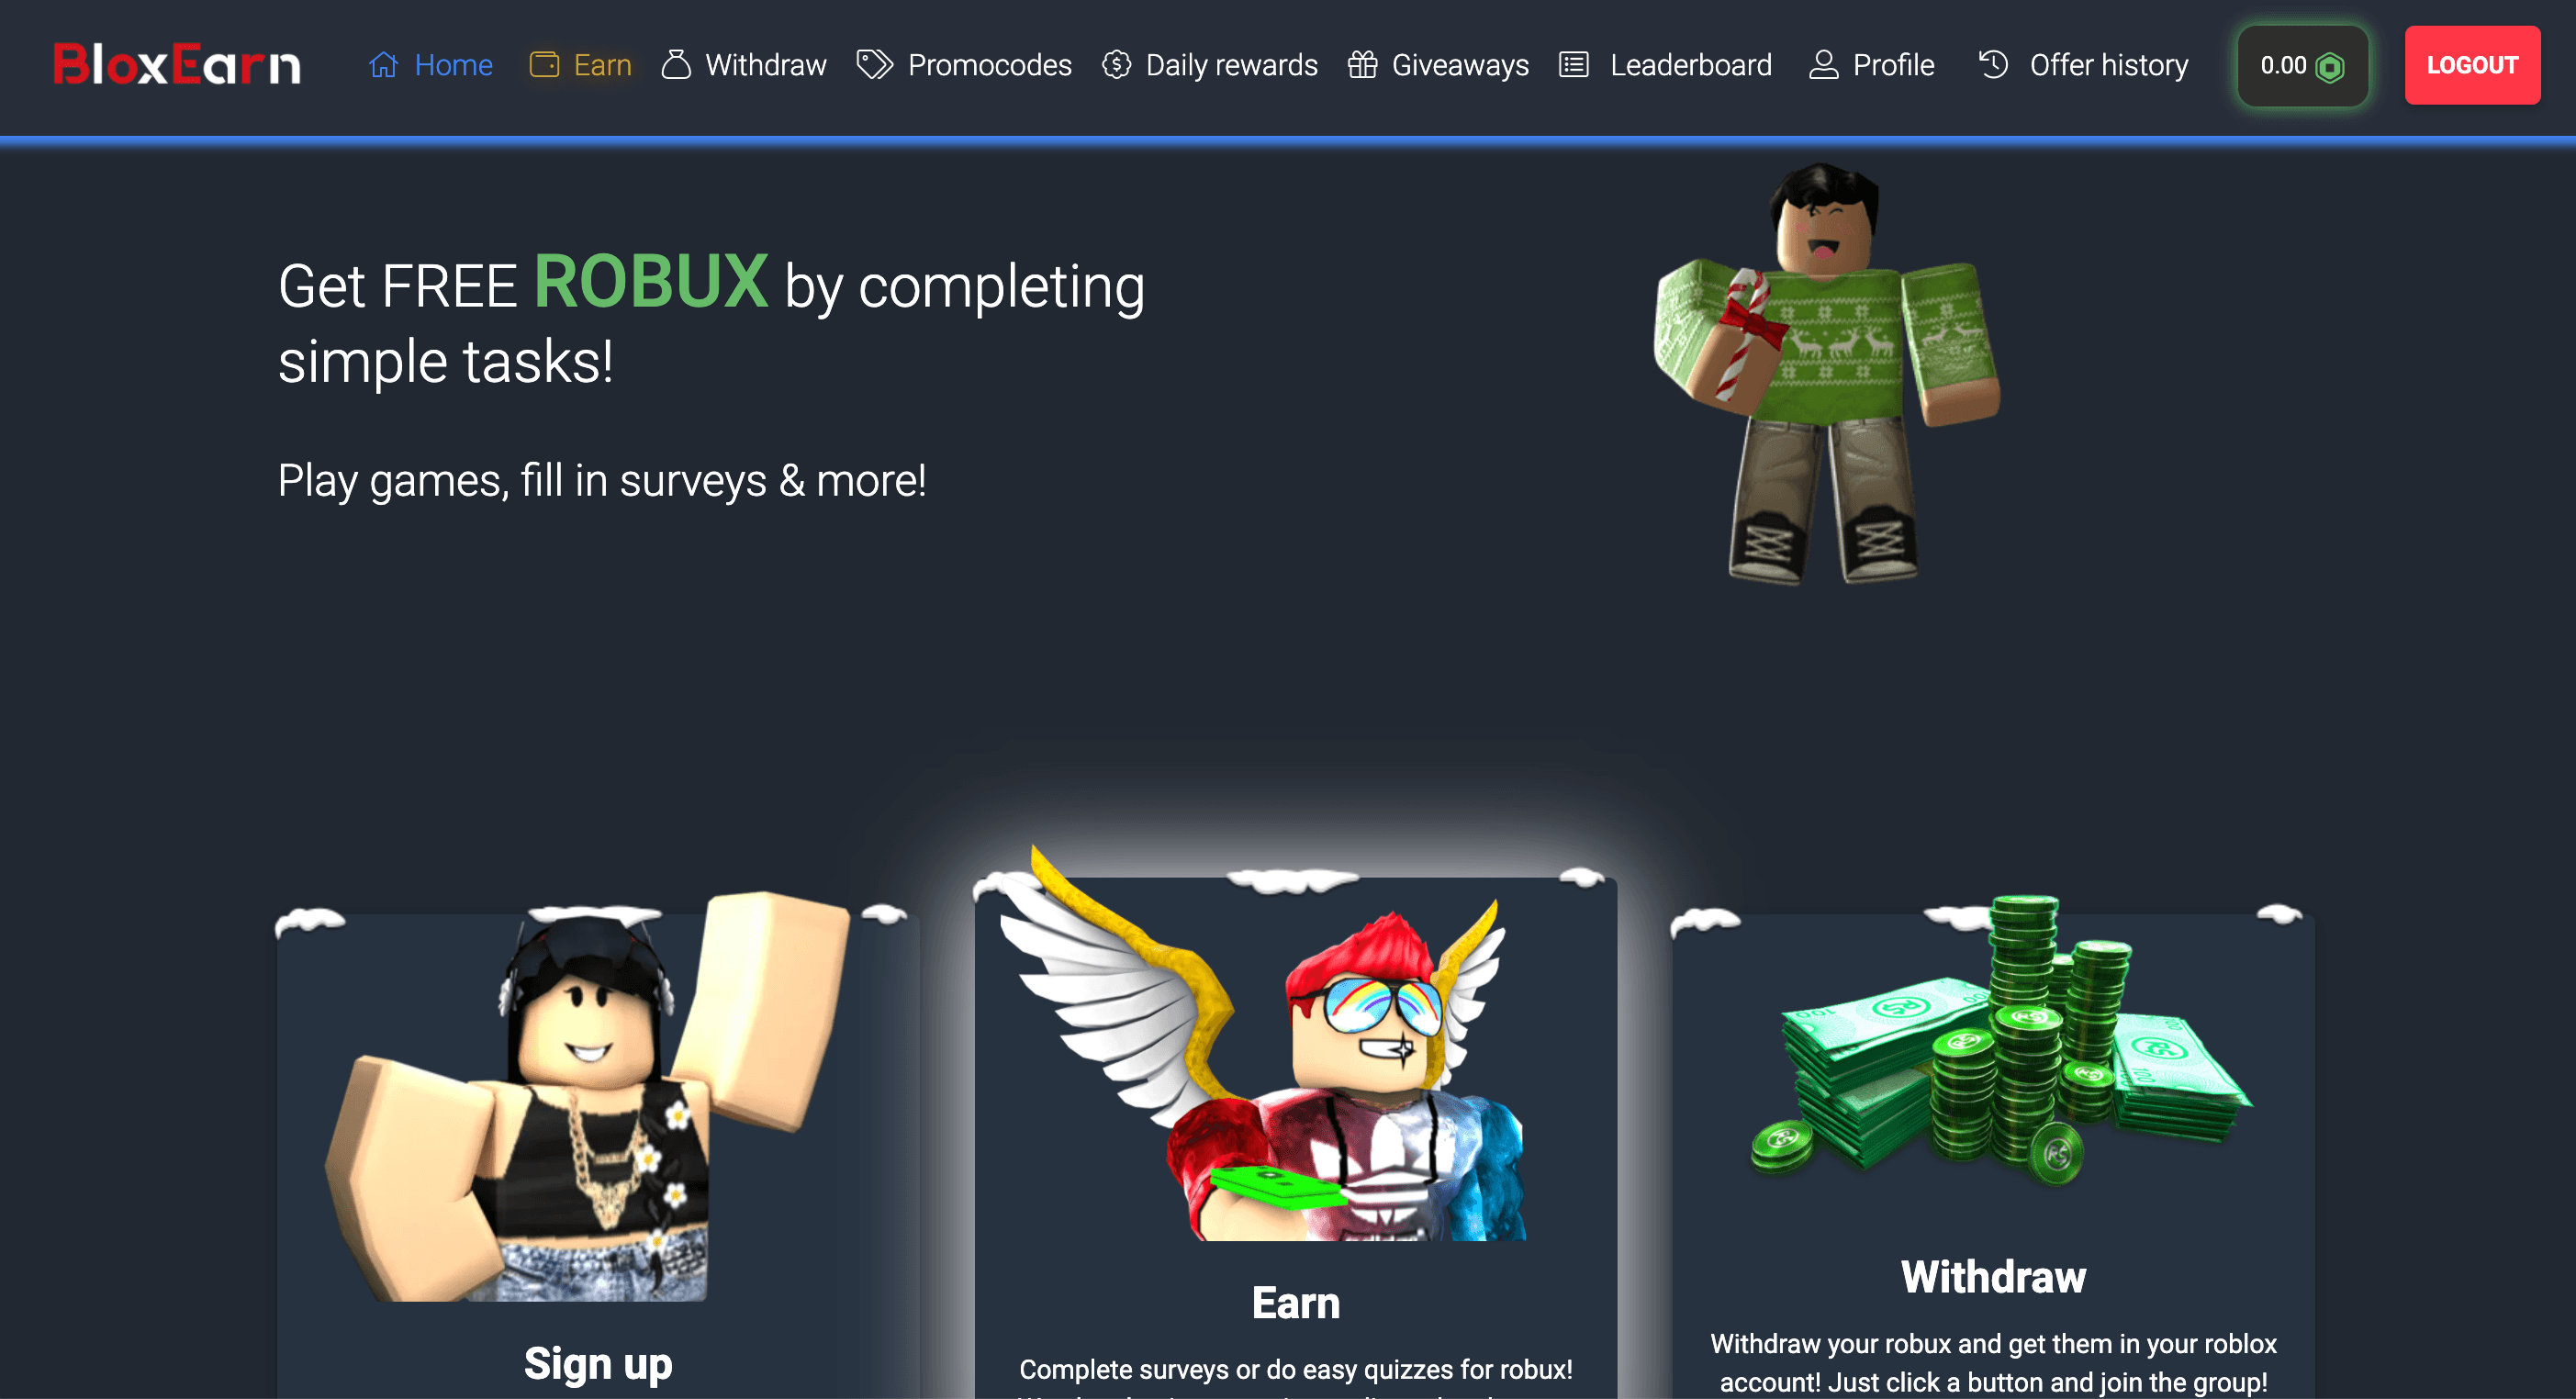 Roblox Promo Codes July 2021 For 1 000 Free Robux Items - how to win robux for free